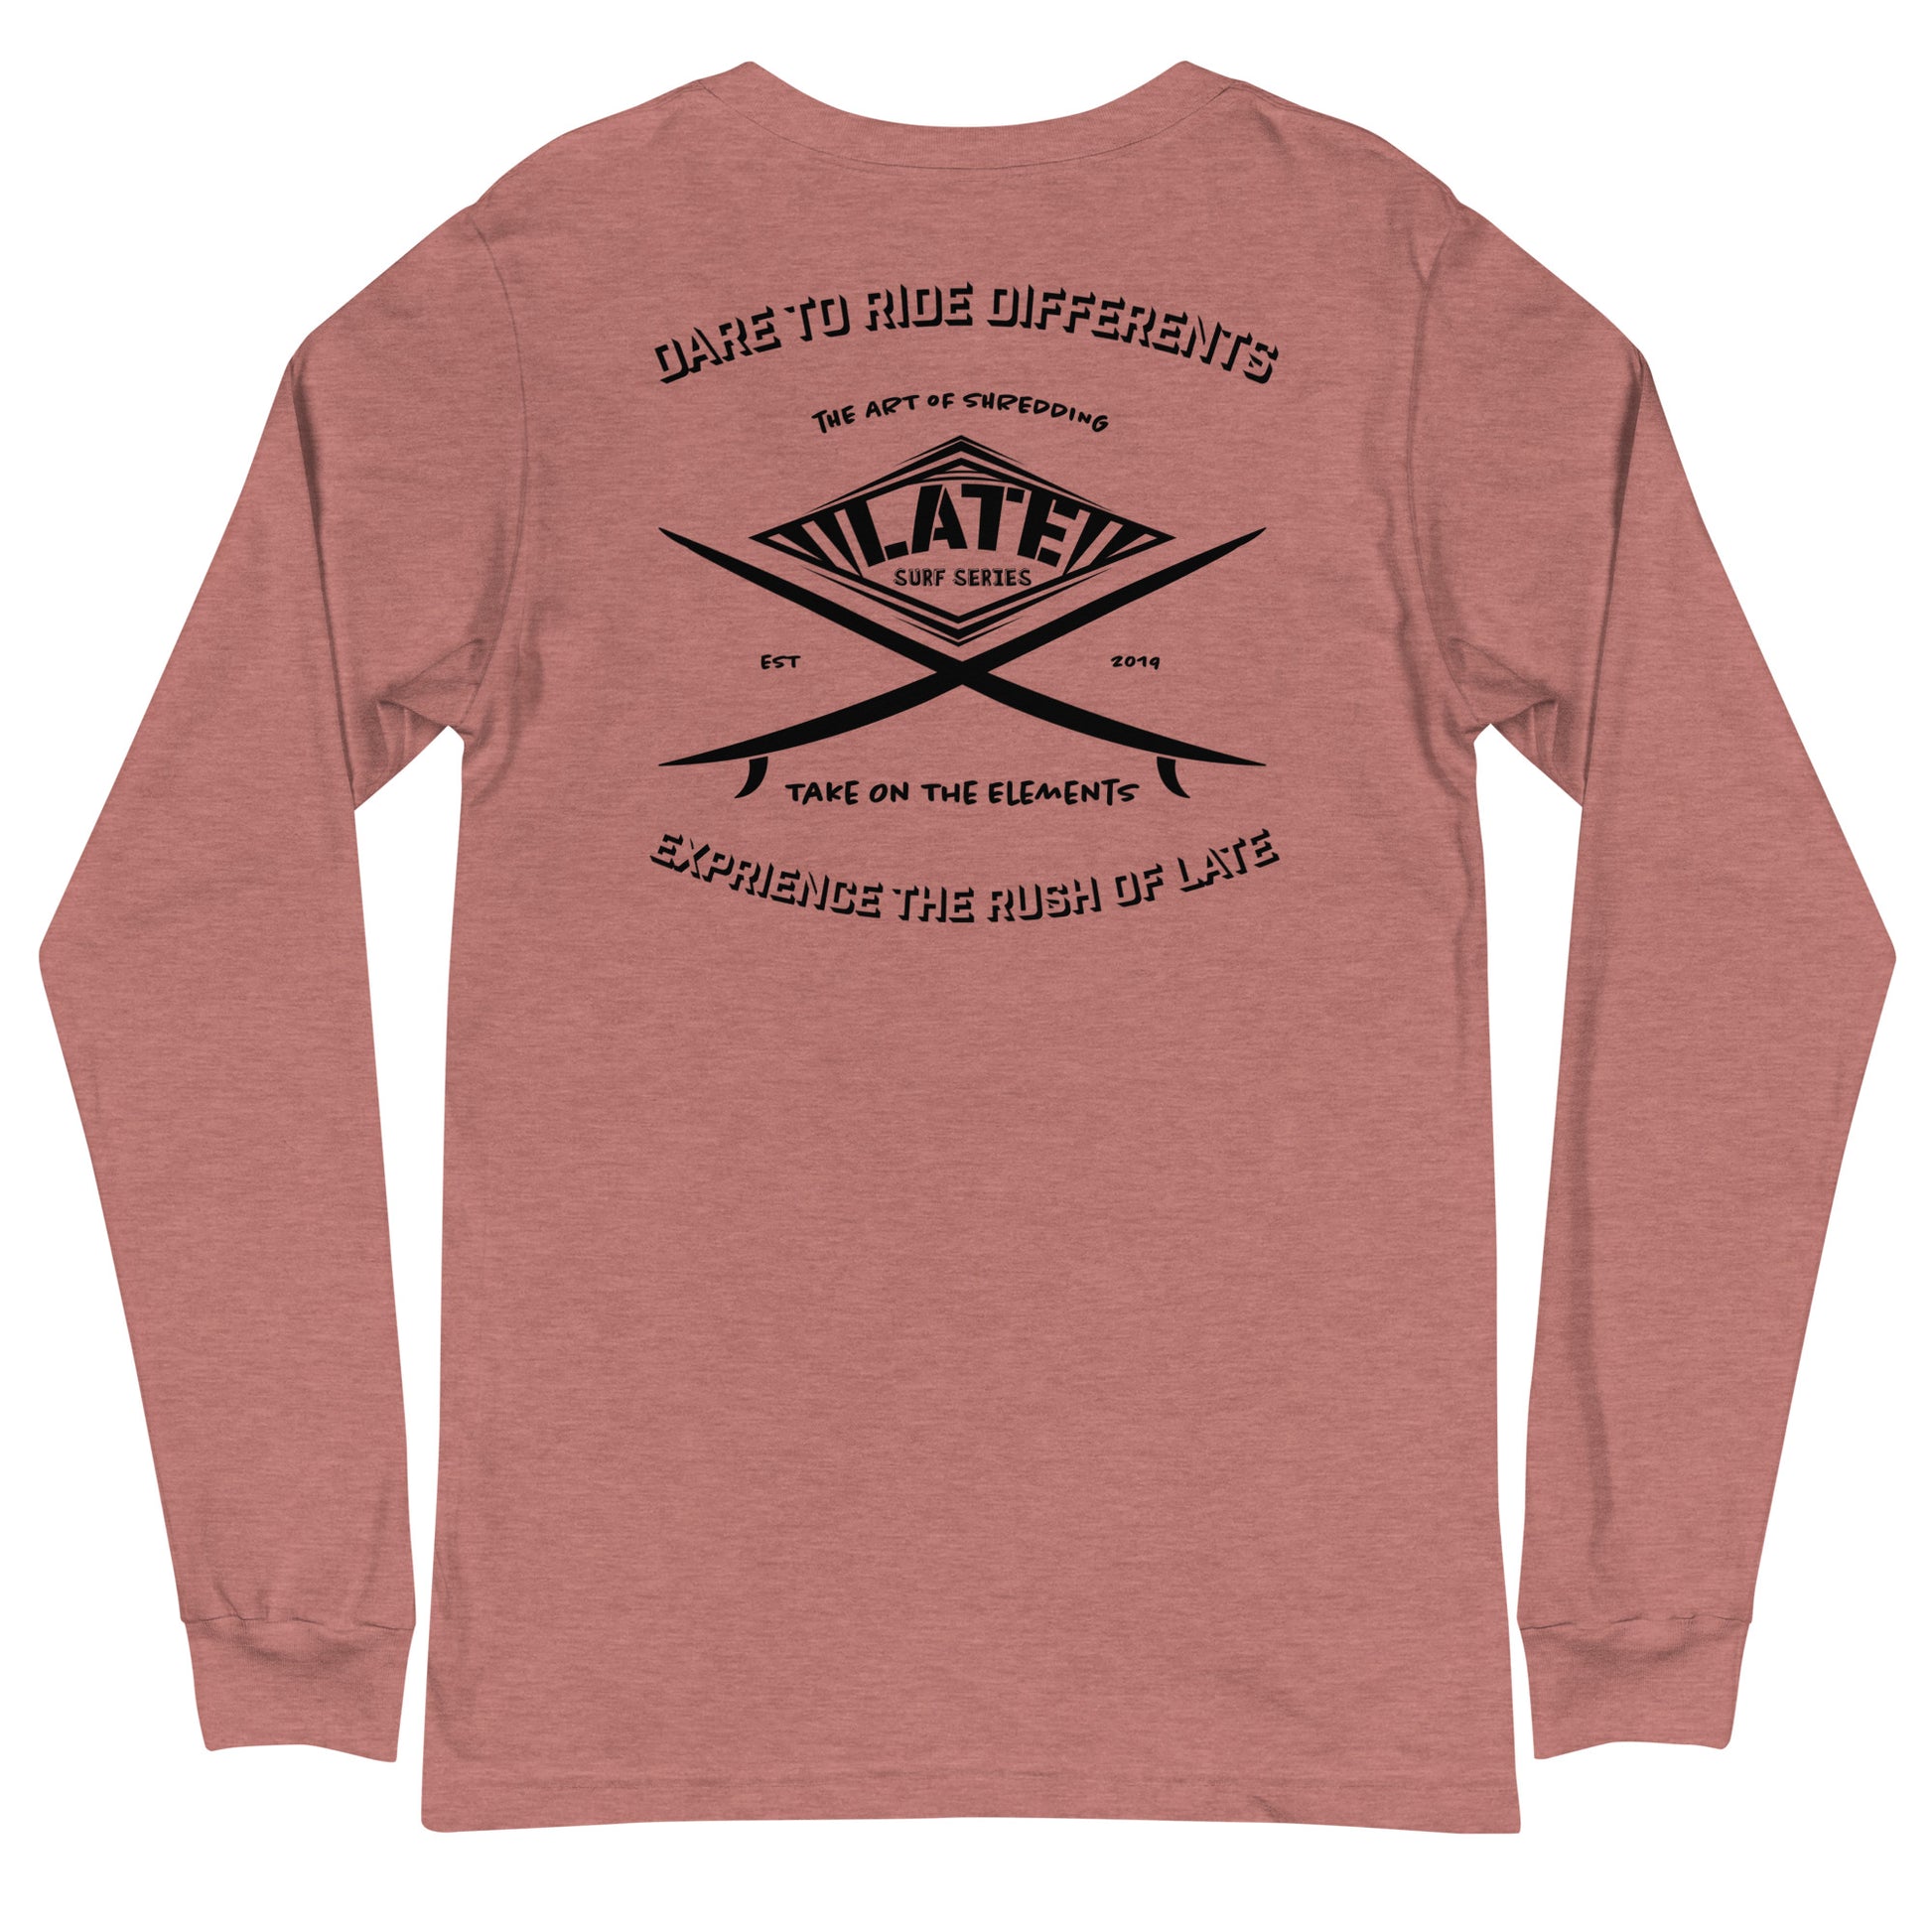 Long Sleeve surf vintage Take On The Elements Logo Late surf series, texte dare to ride differents couleur mauve